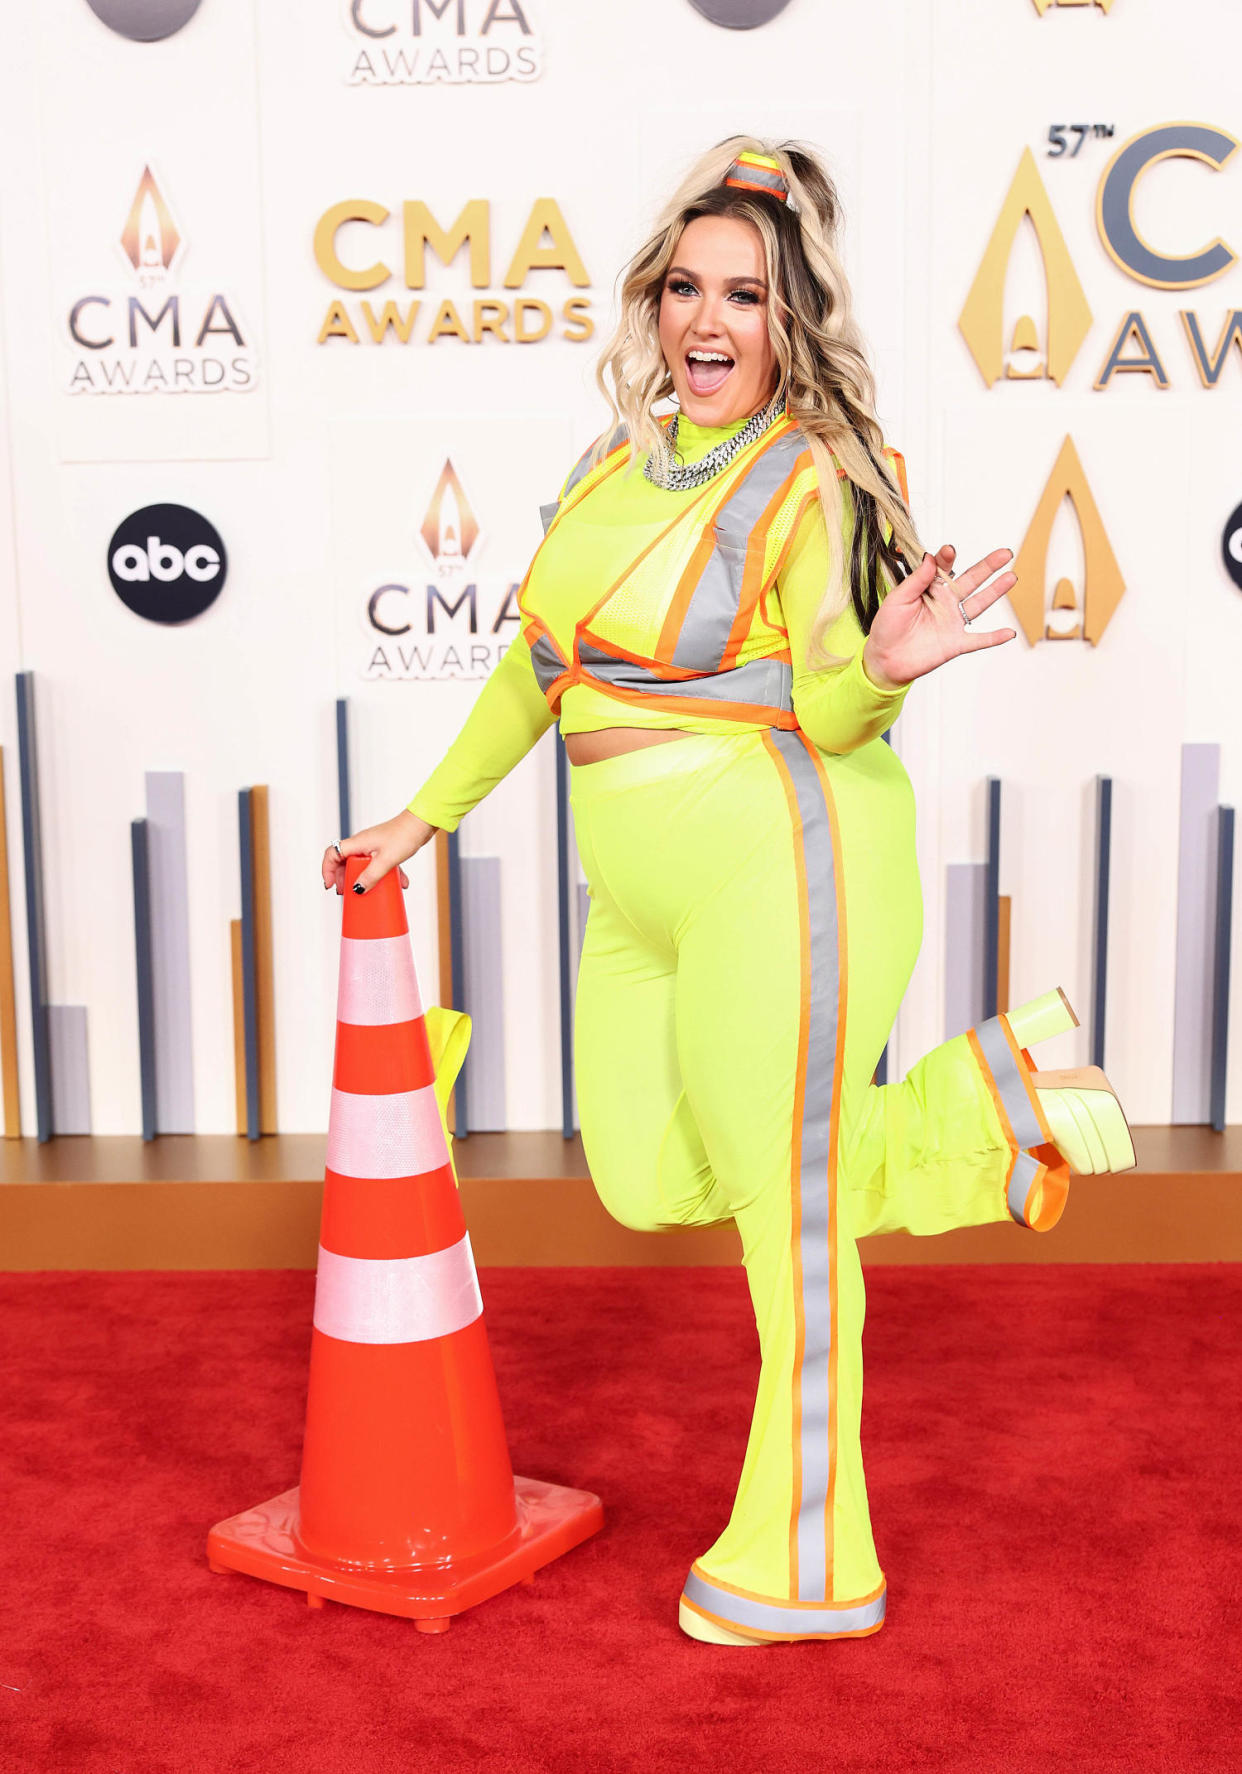 The 57th Annual CMA Awards - Arrivals (Christopher Polk / Variety via Getty Images)